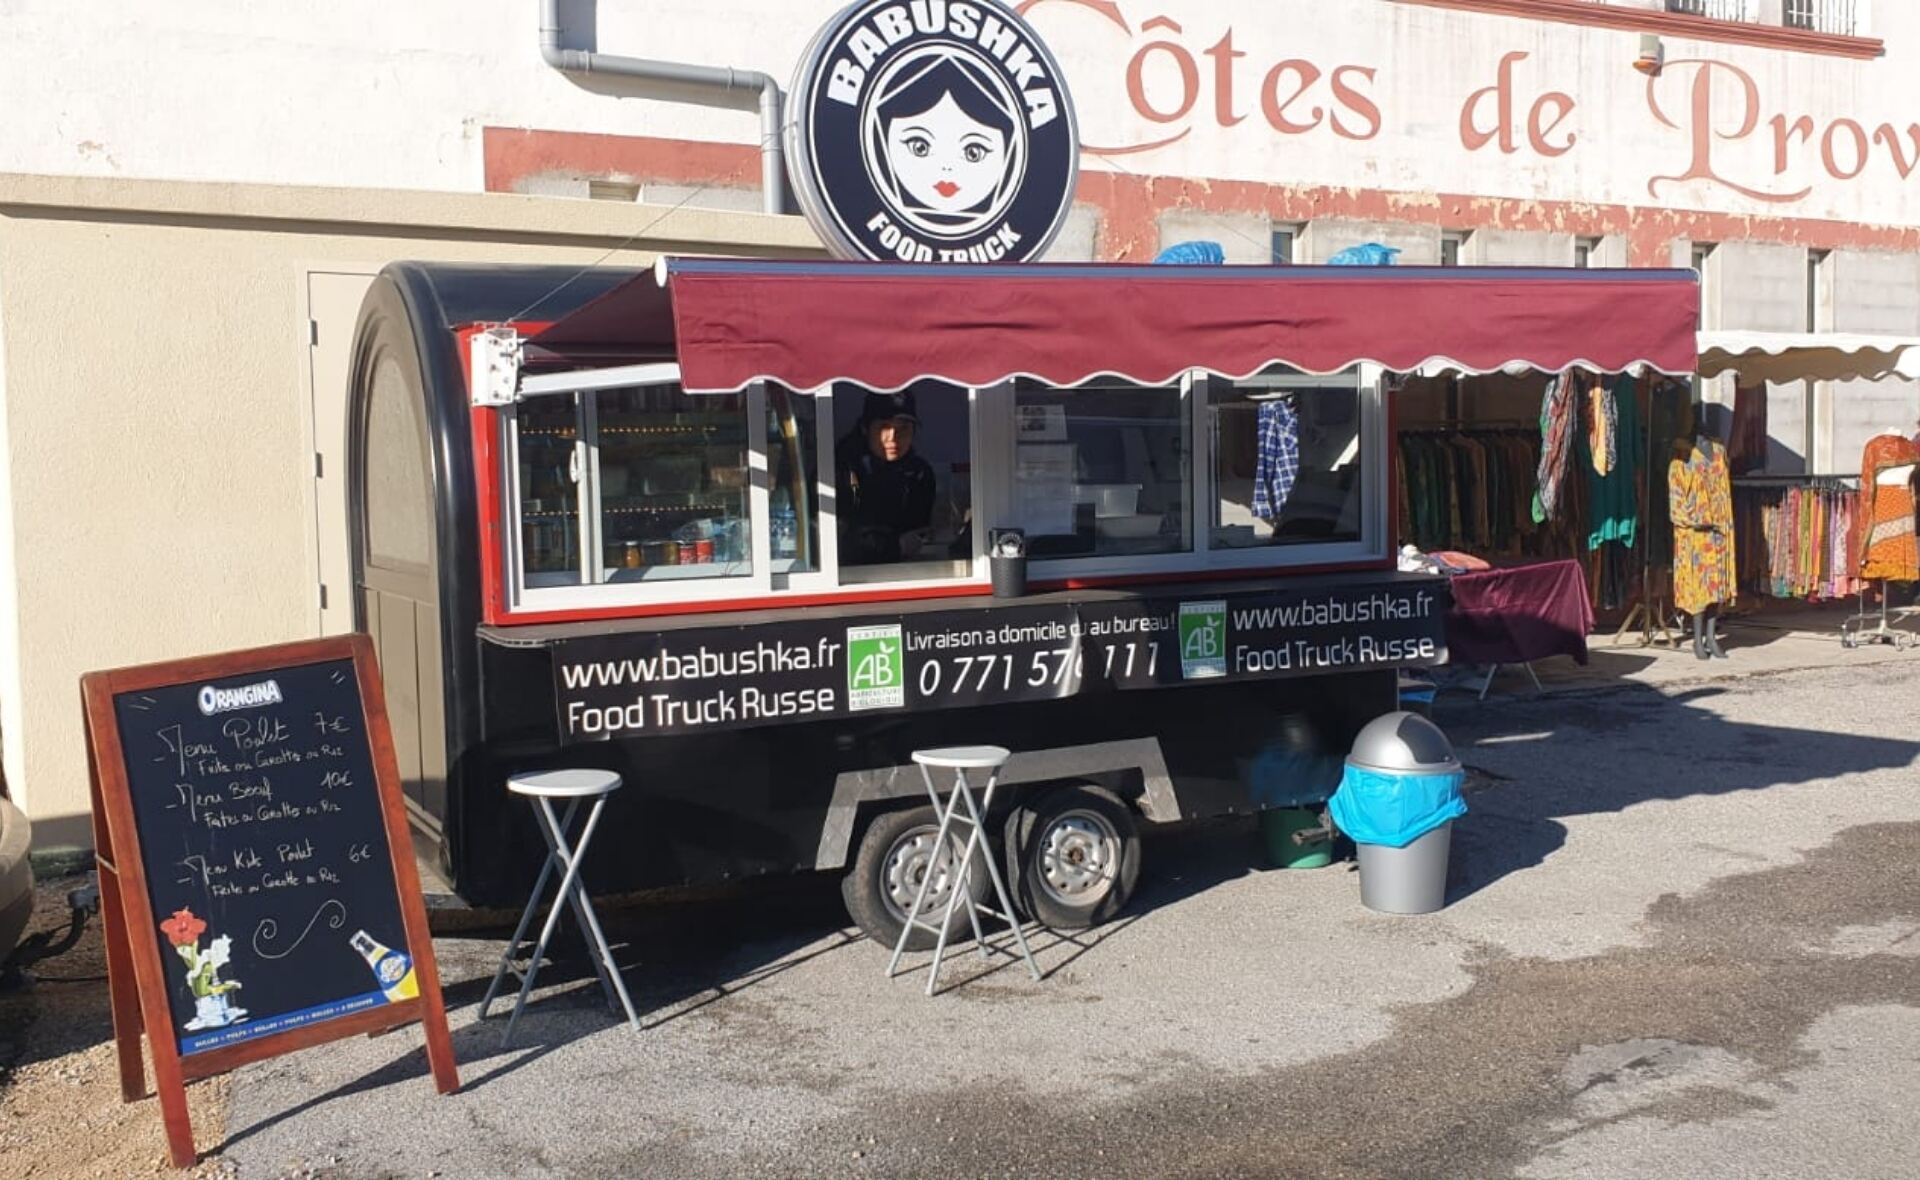 3.5m(11FT) Round Food Truck In France